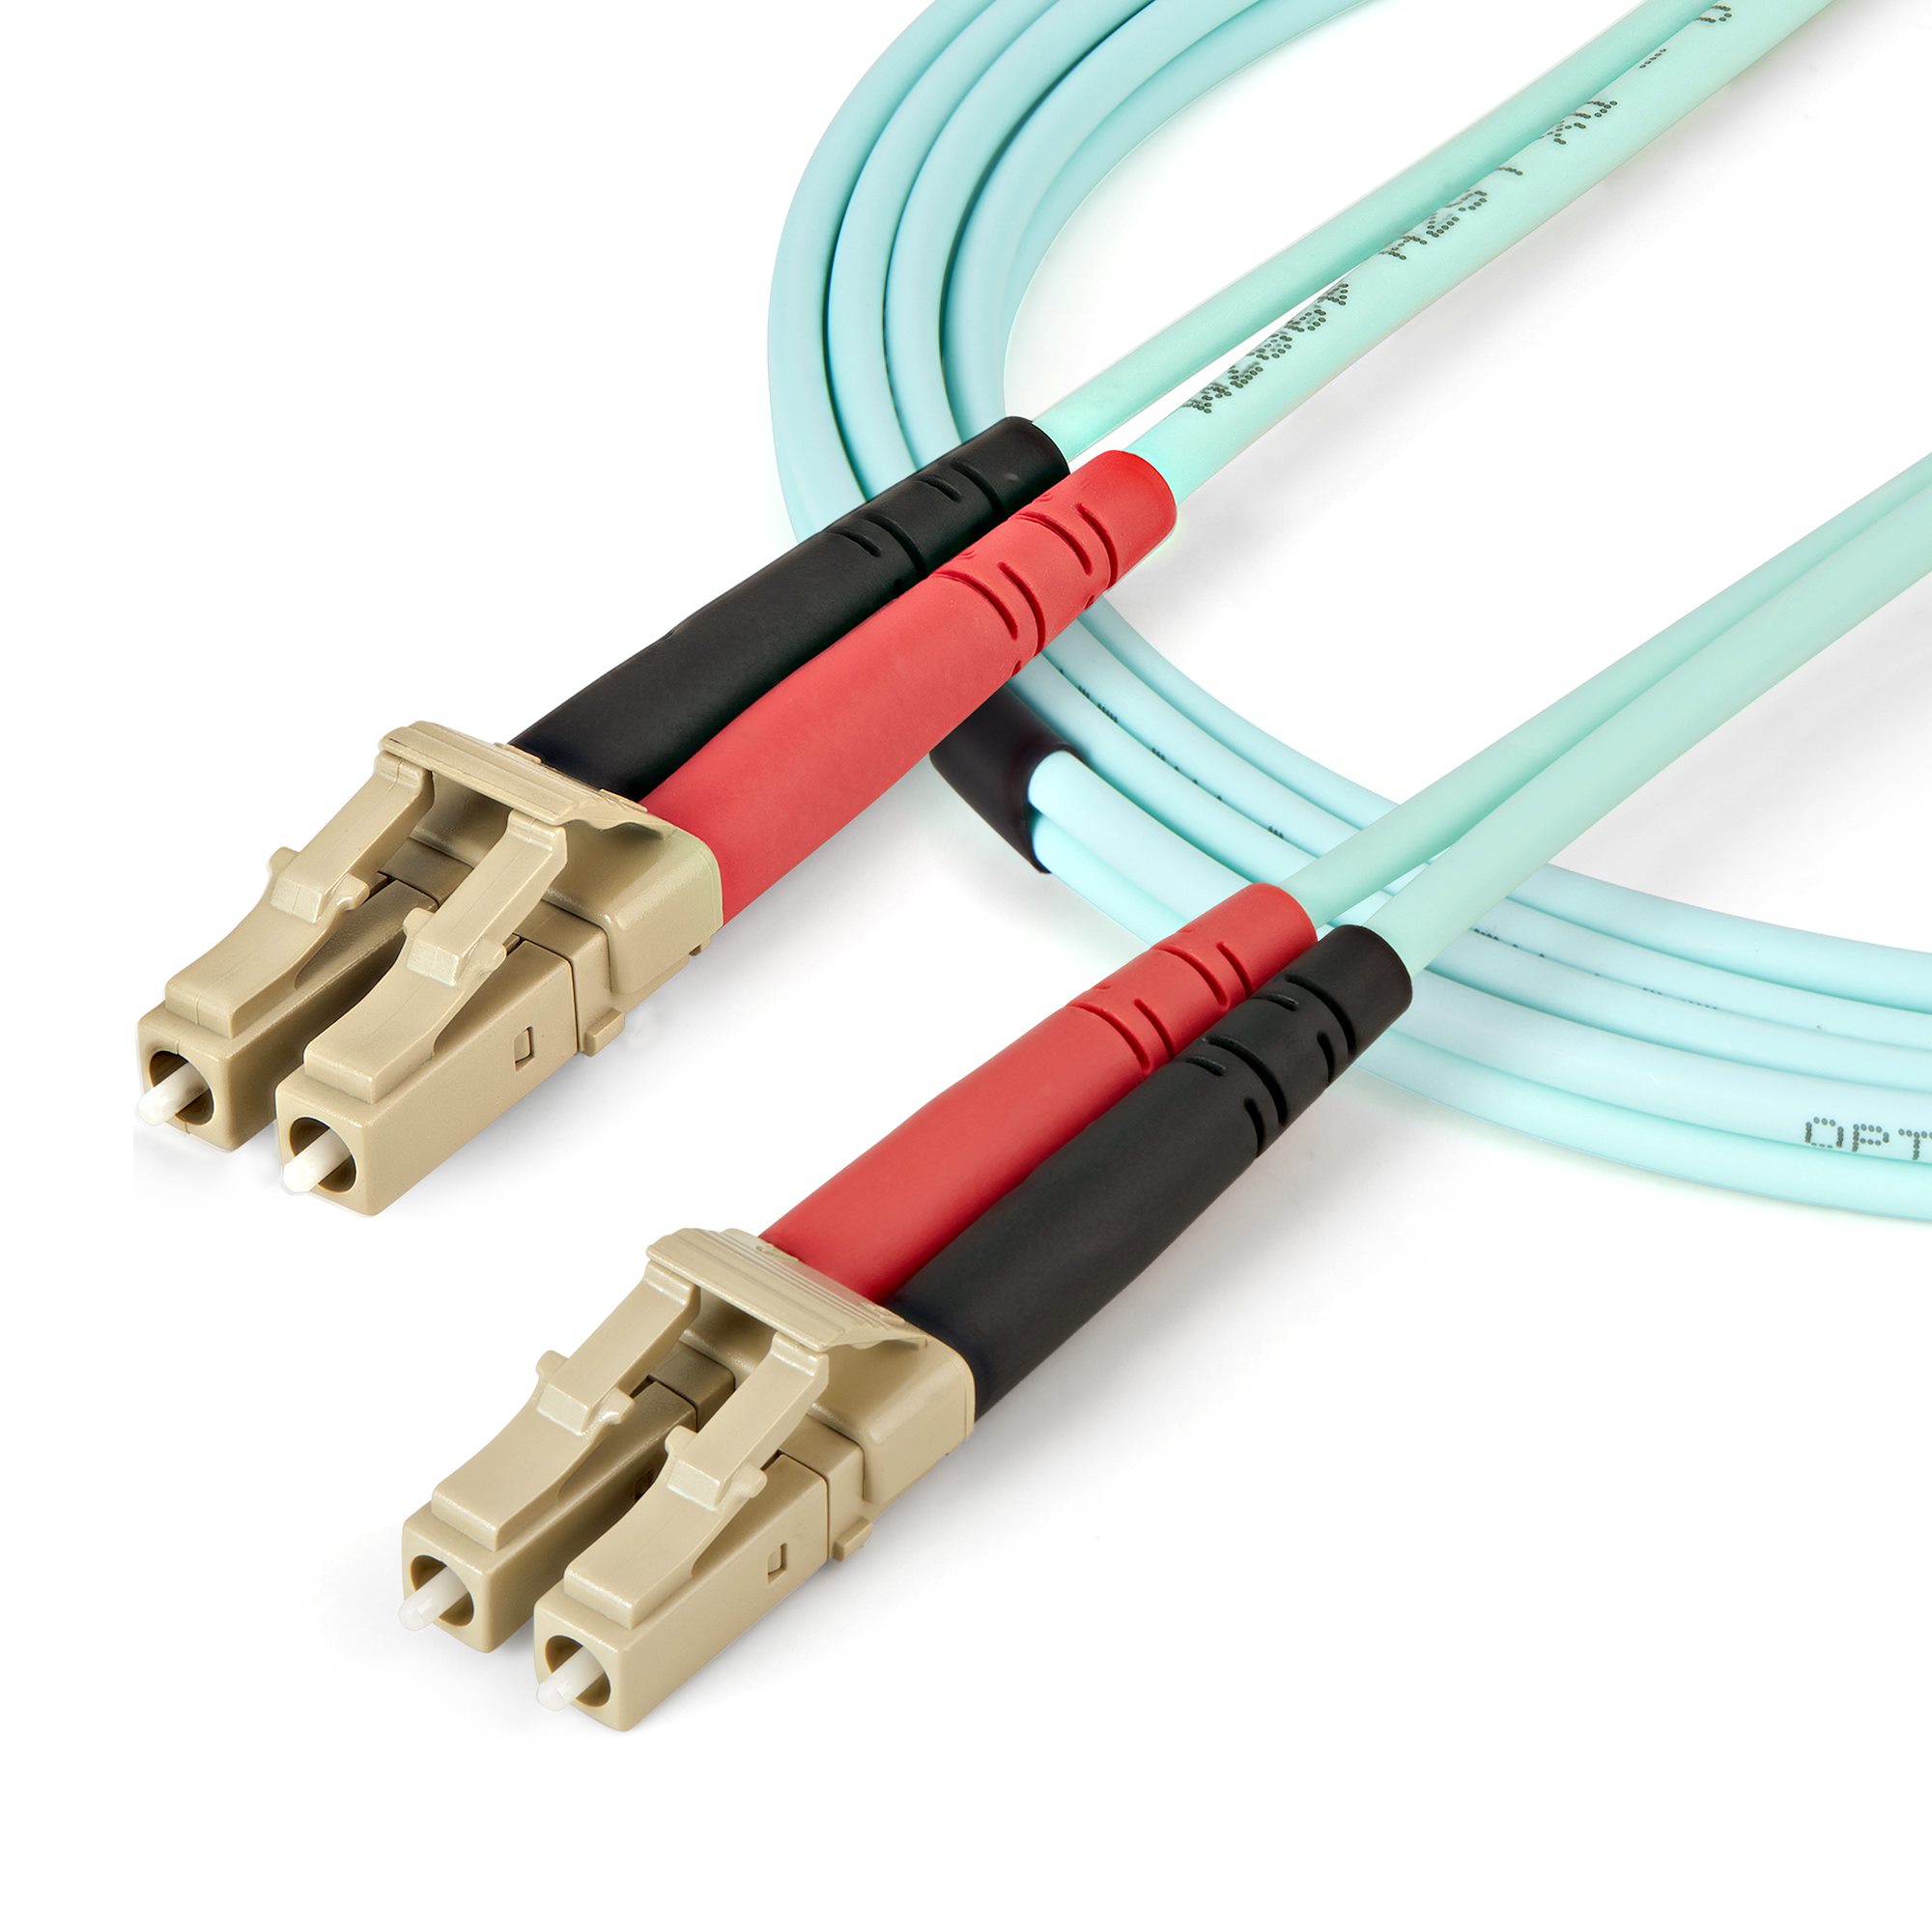 Cable HDMI 2M sans emballage